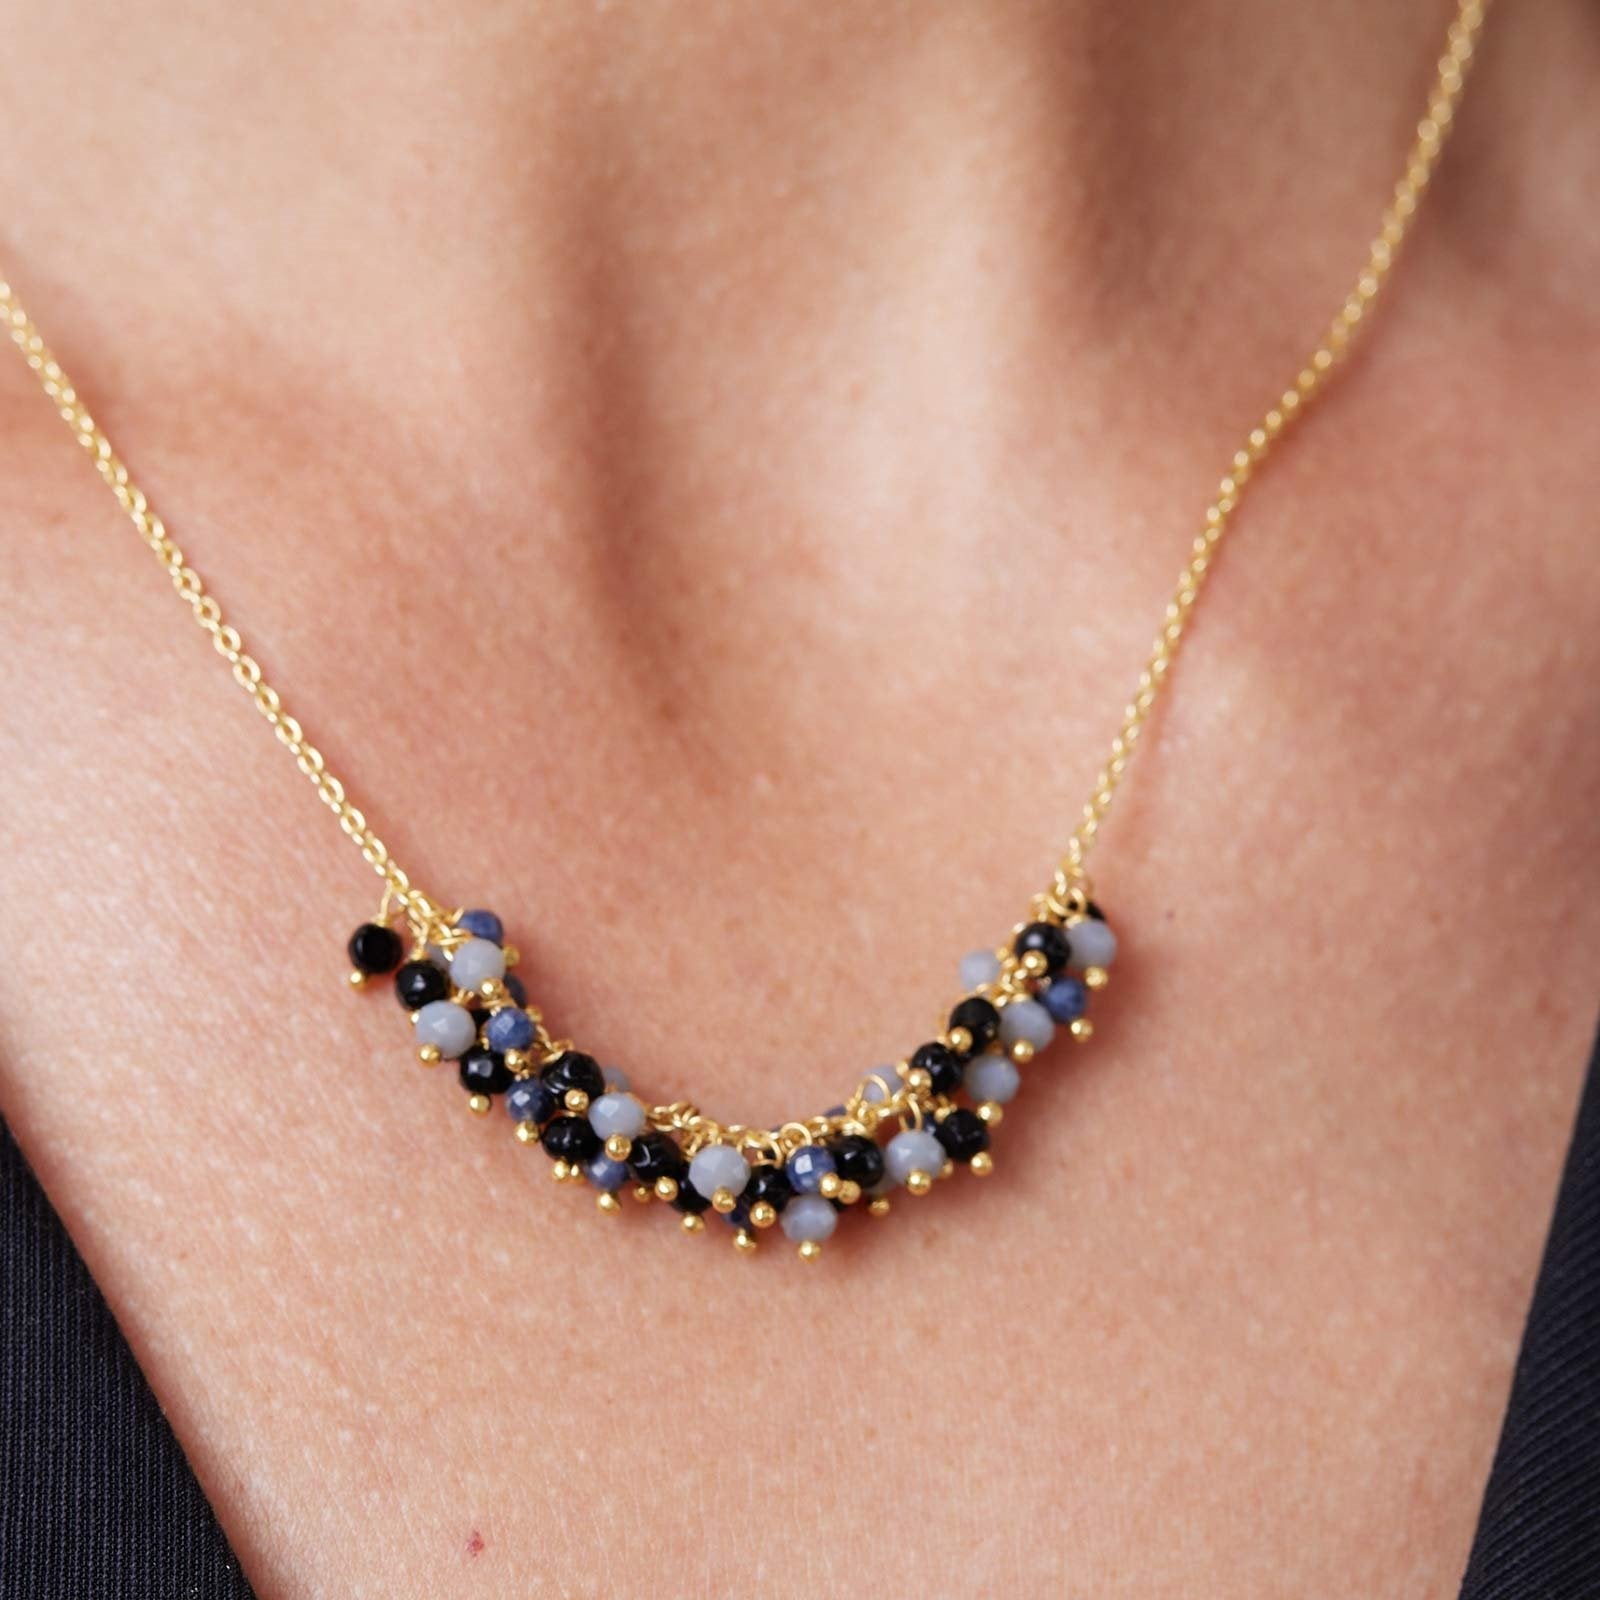 18 Inch 18K Gold Plated Black Onyx Lapiz And Grey Chalcedony Beaded Necklace Necklace - rockflowerpaper